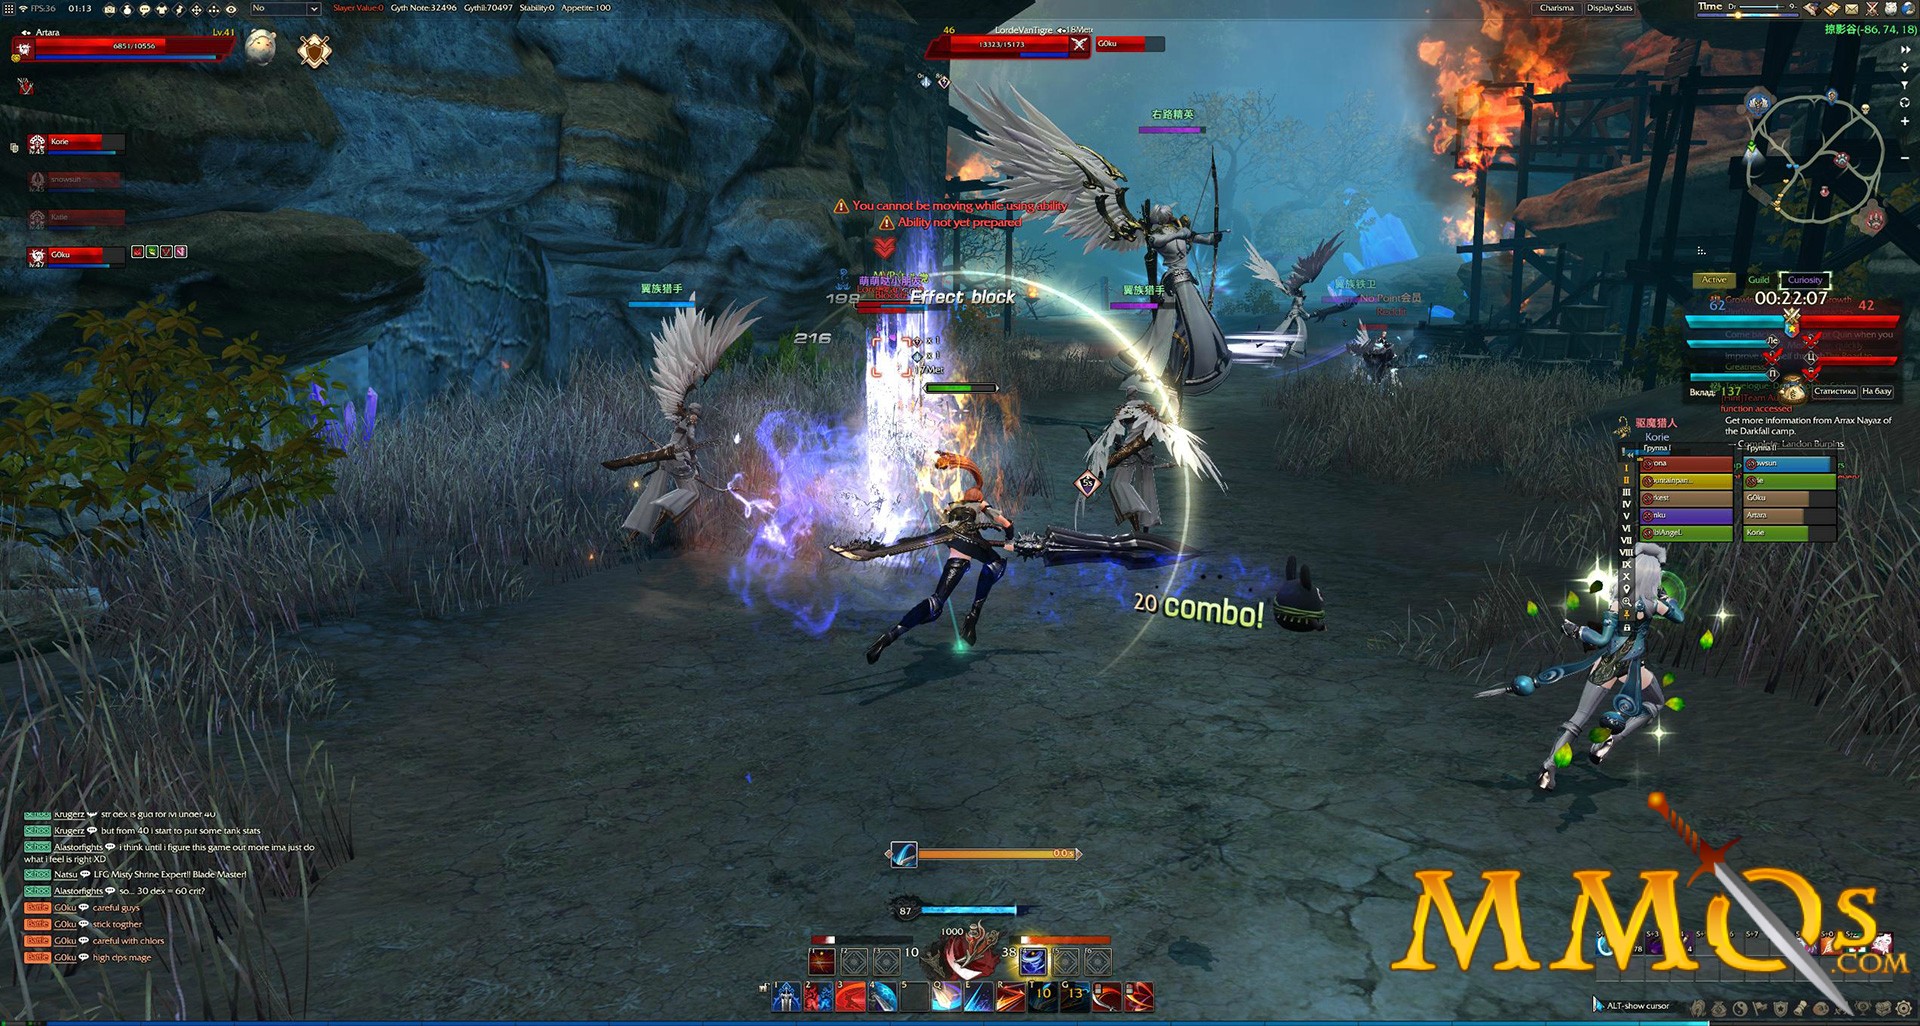 Play Revelation Online on MGLauncher from August 24!